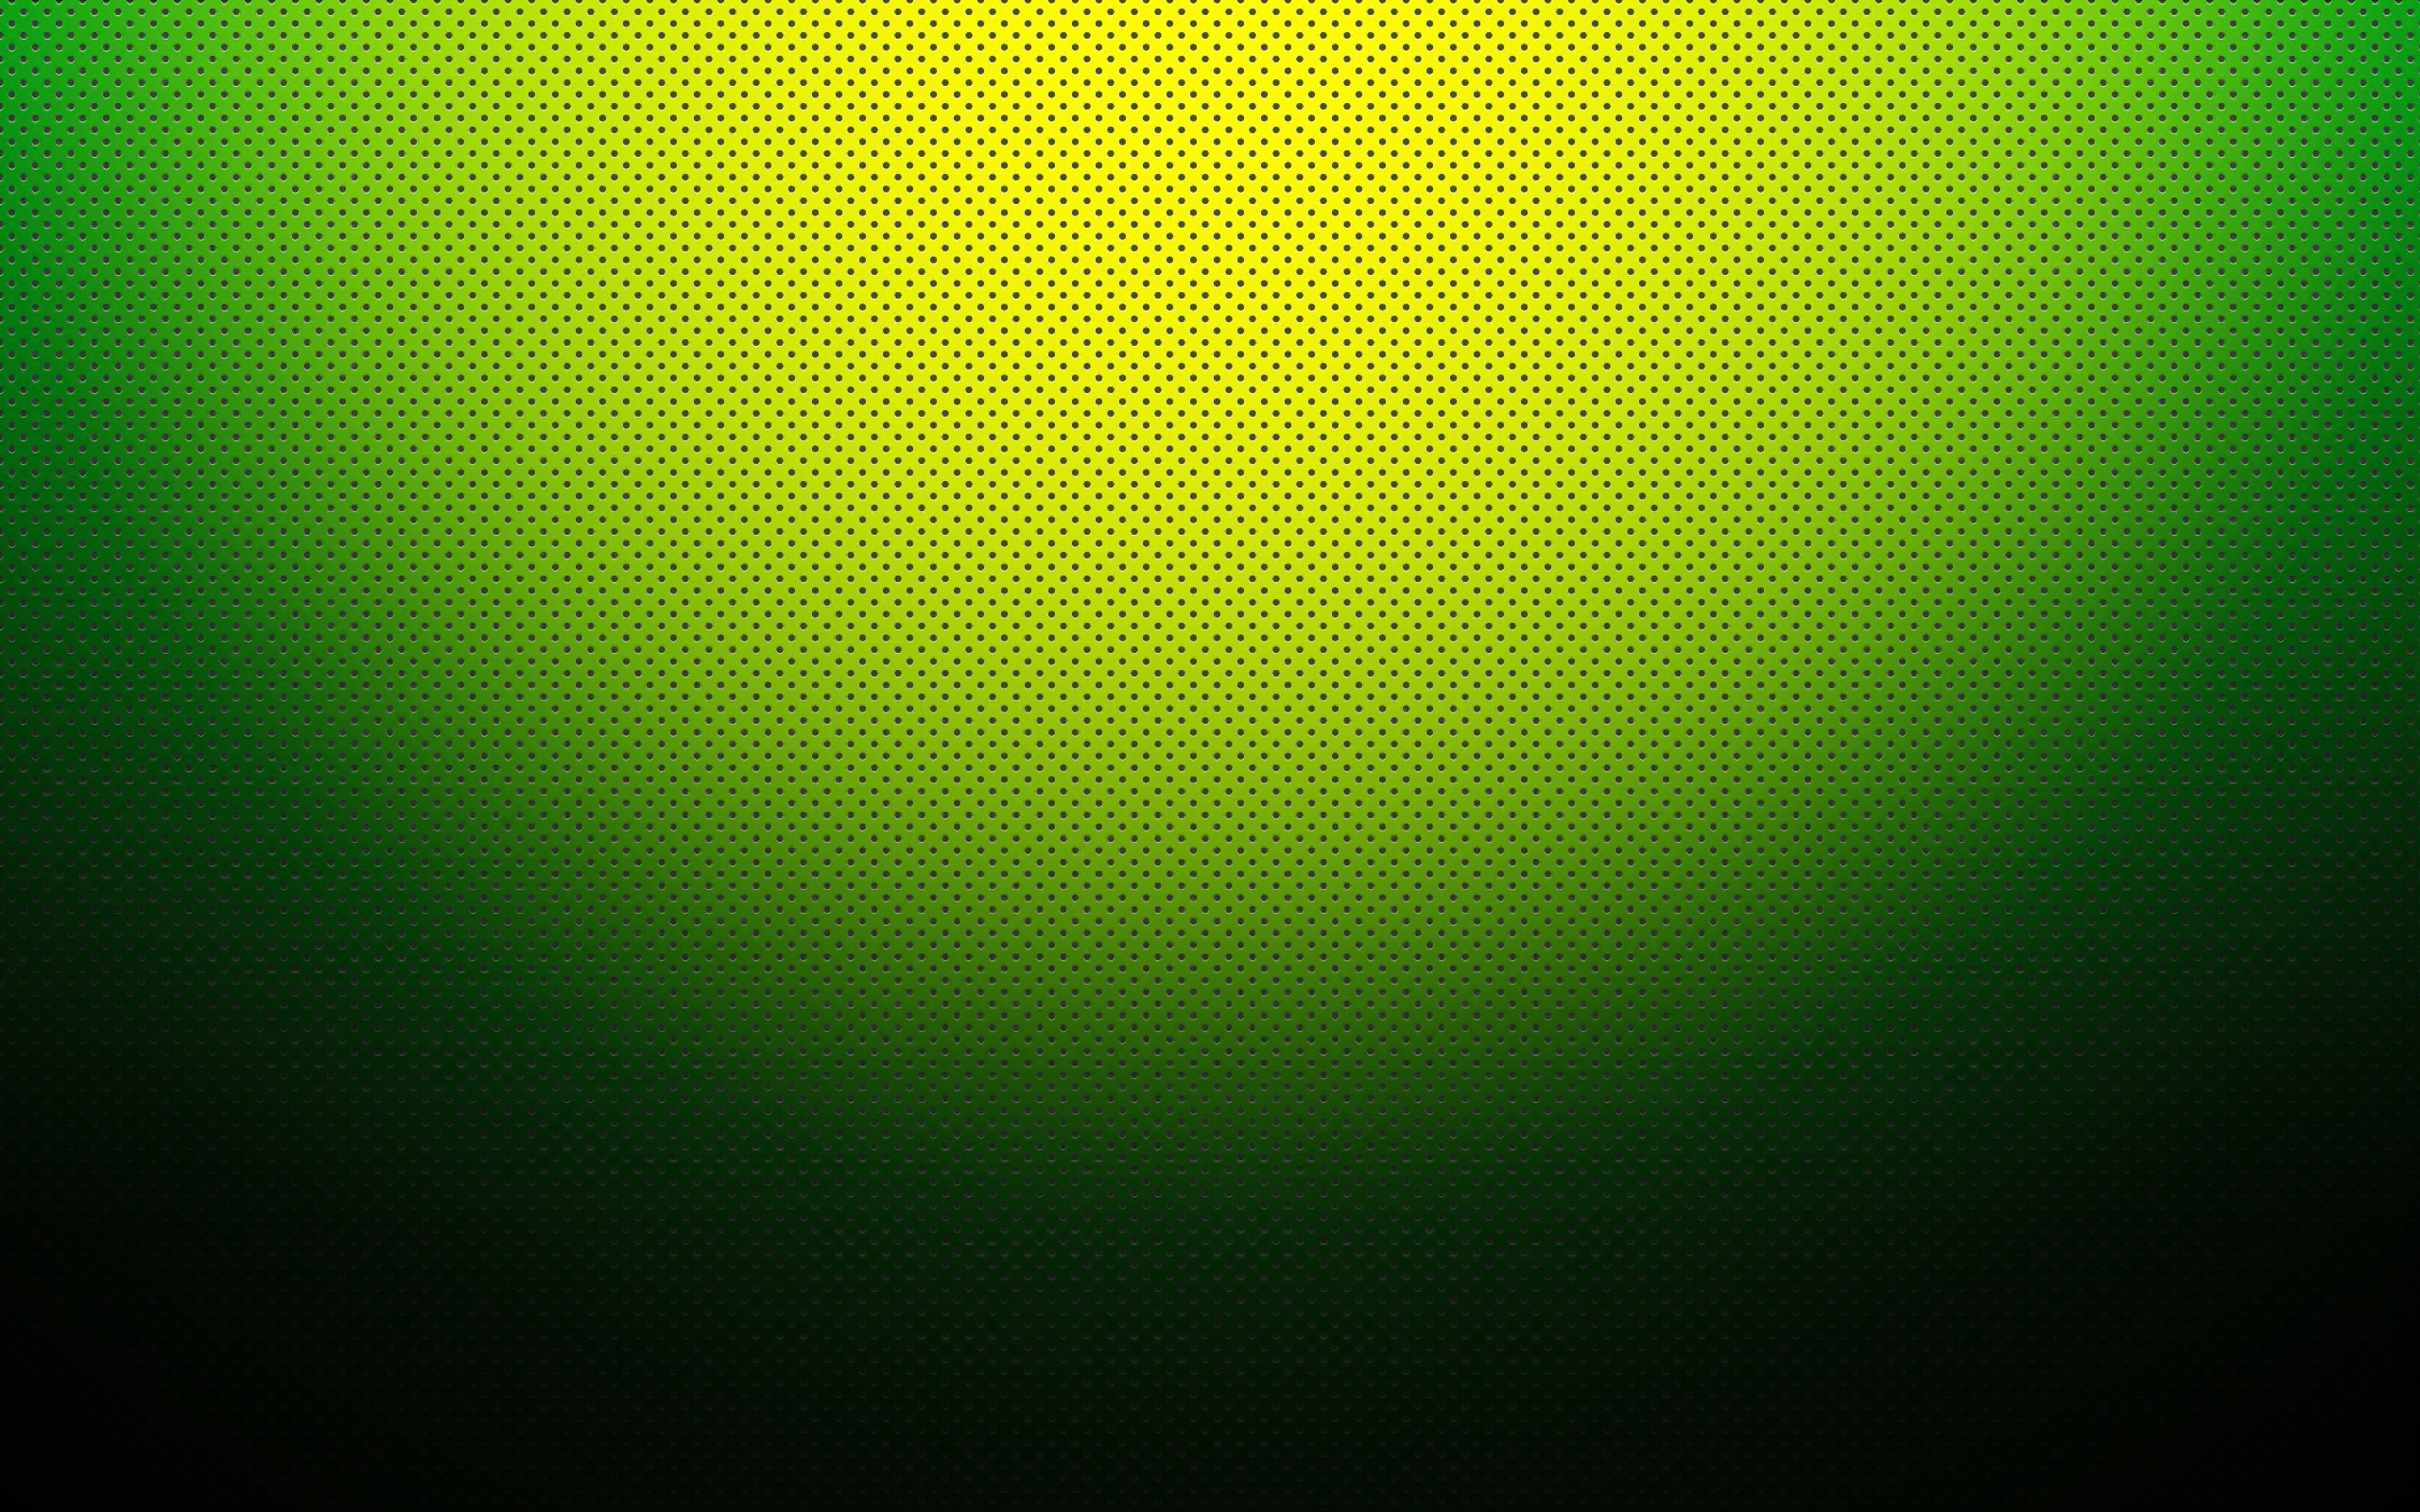 green, abstract, dots, pattern